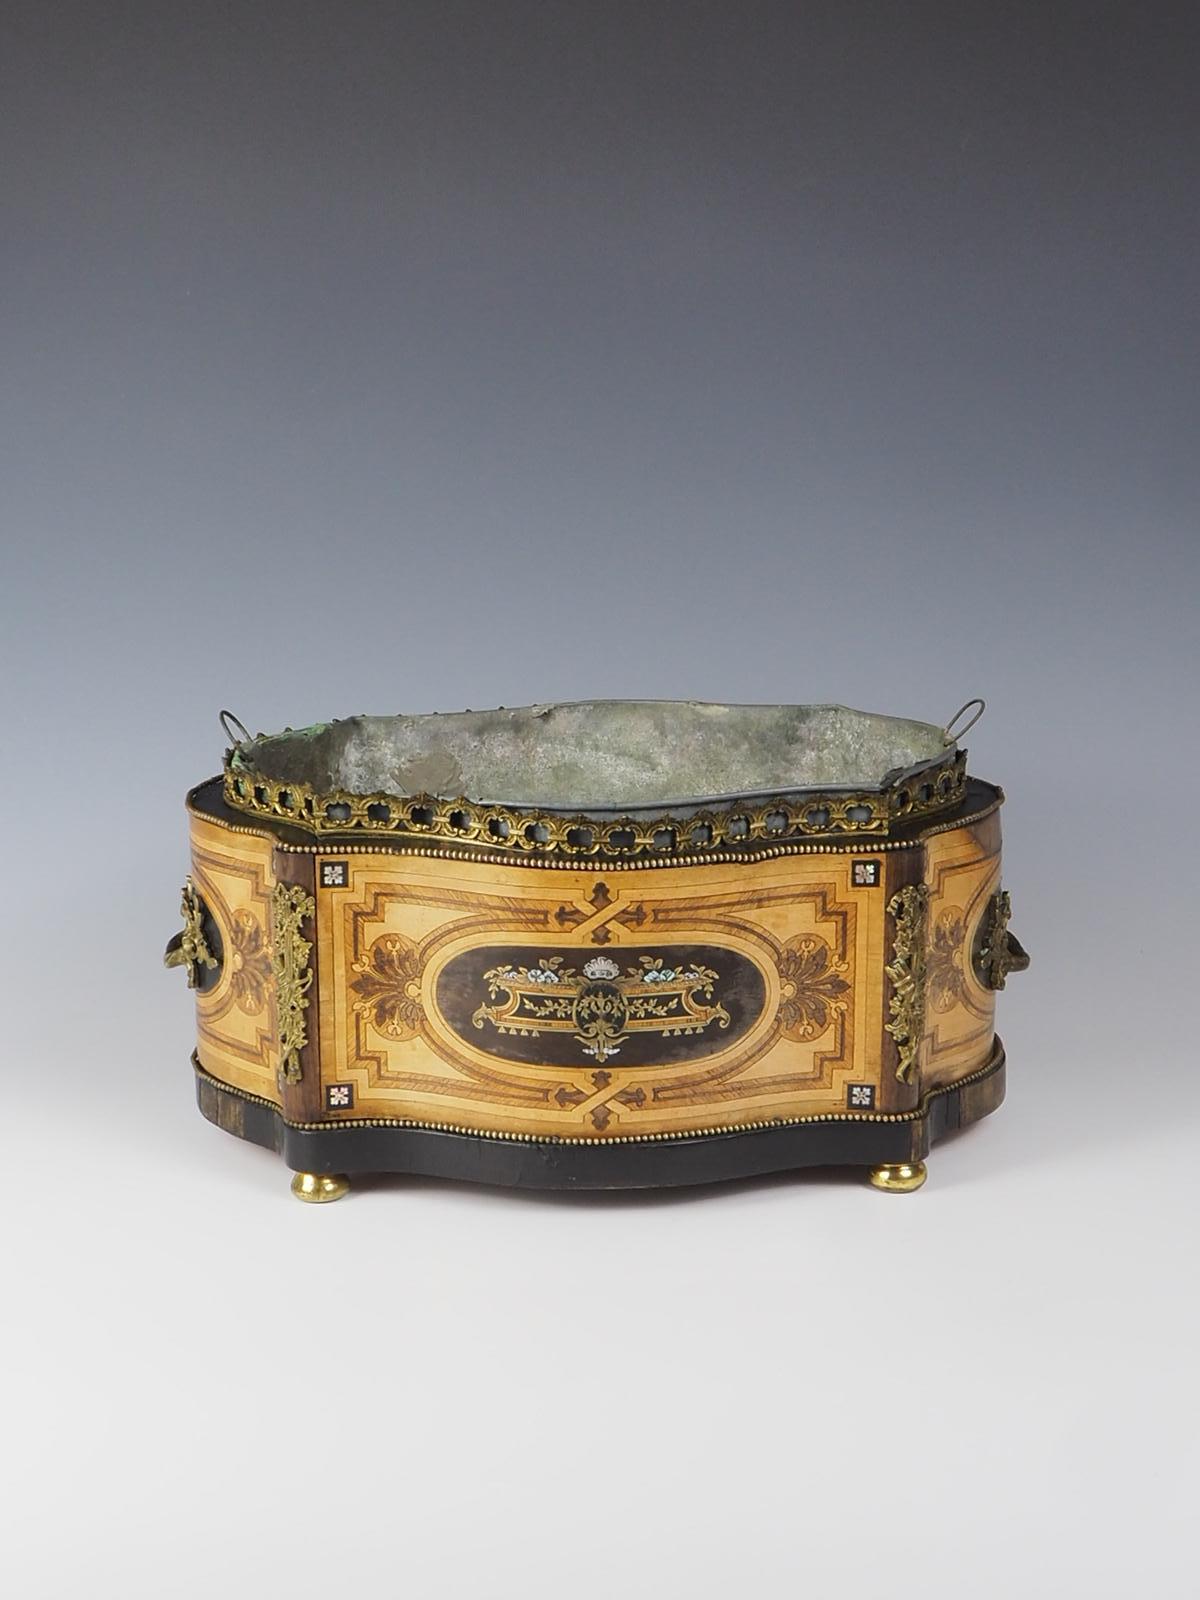 Antique Marquetry Jardiniere 19th Century French

This exquisite jardiniere hails from 19th Century France. It showcases meticulous marquetry inlay, featuring fine metals and lacquer. The piece is adorned with intricate ormolu mounts and handles,